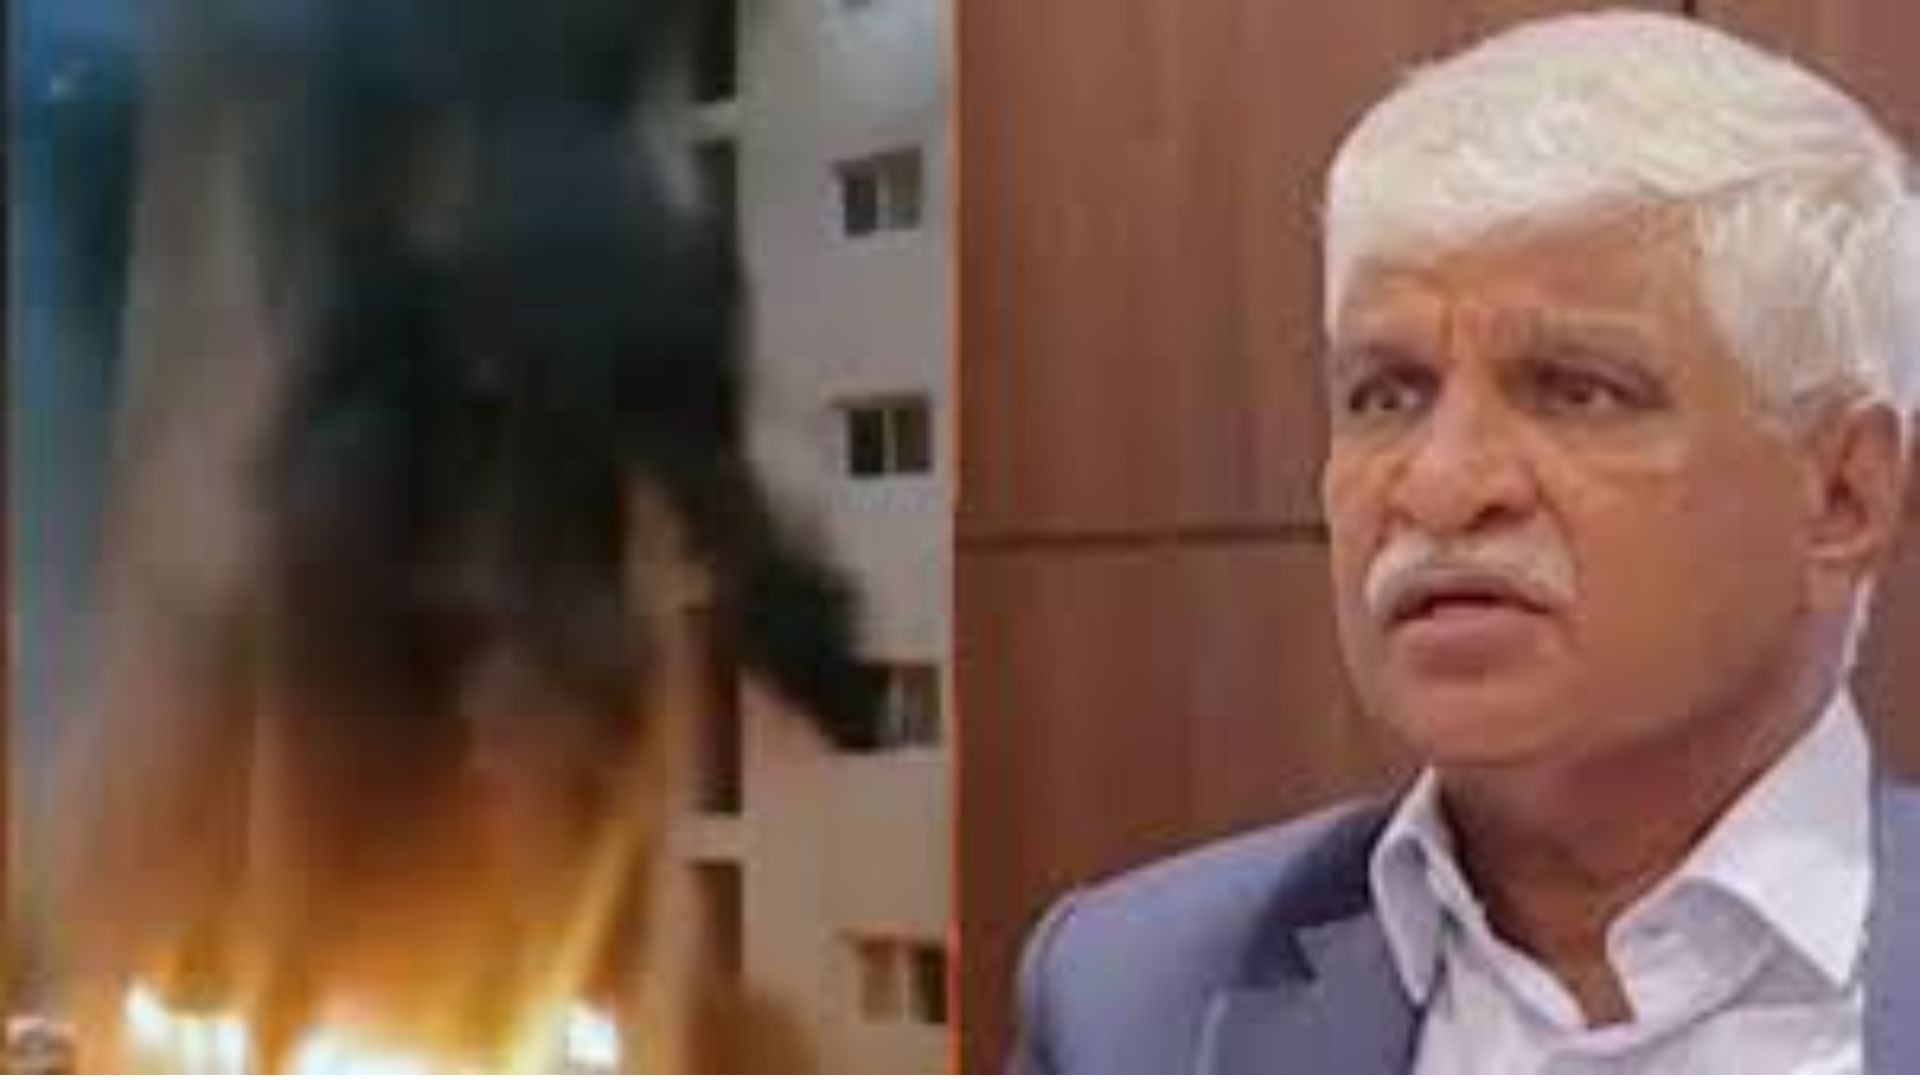 Kuwait Fire: Know About KG Abraham, Aadujeevitham Producer And Head Of NBTC Group